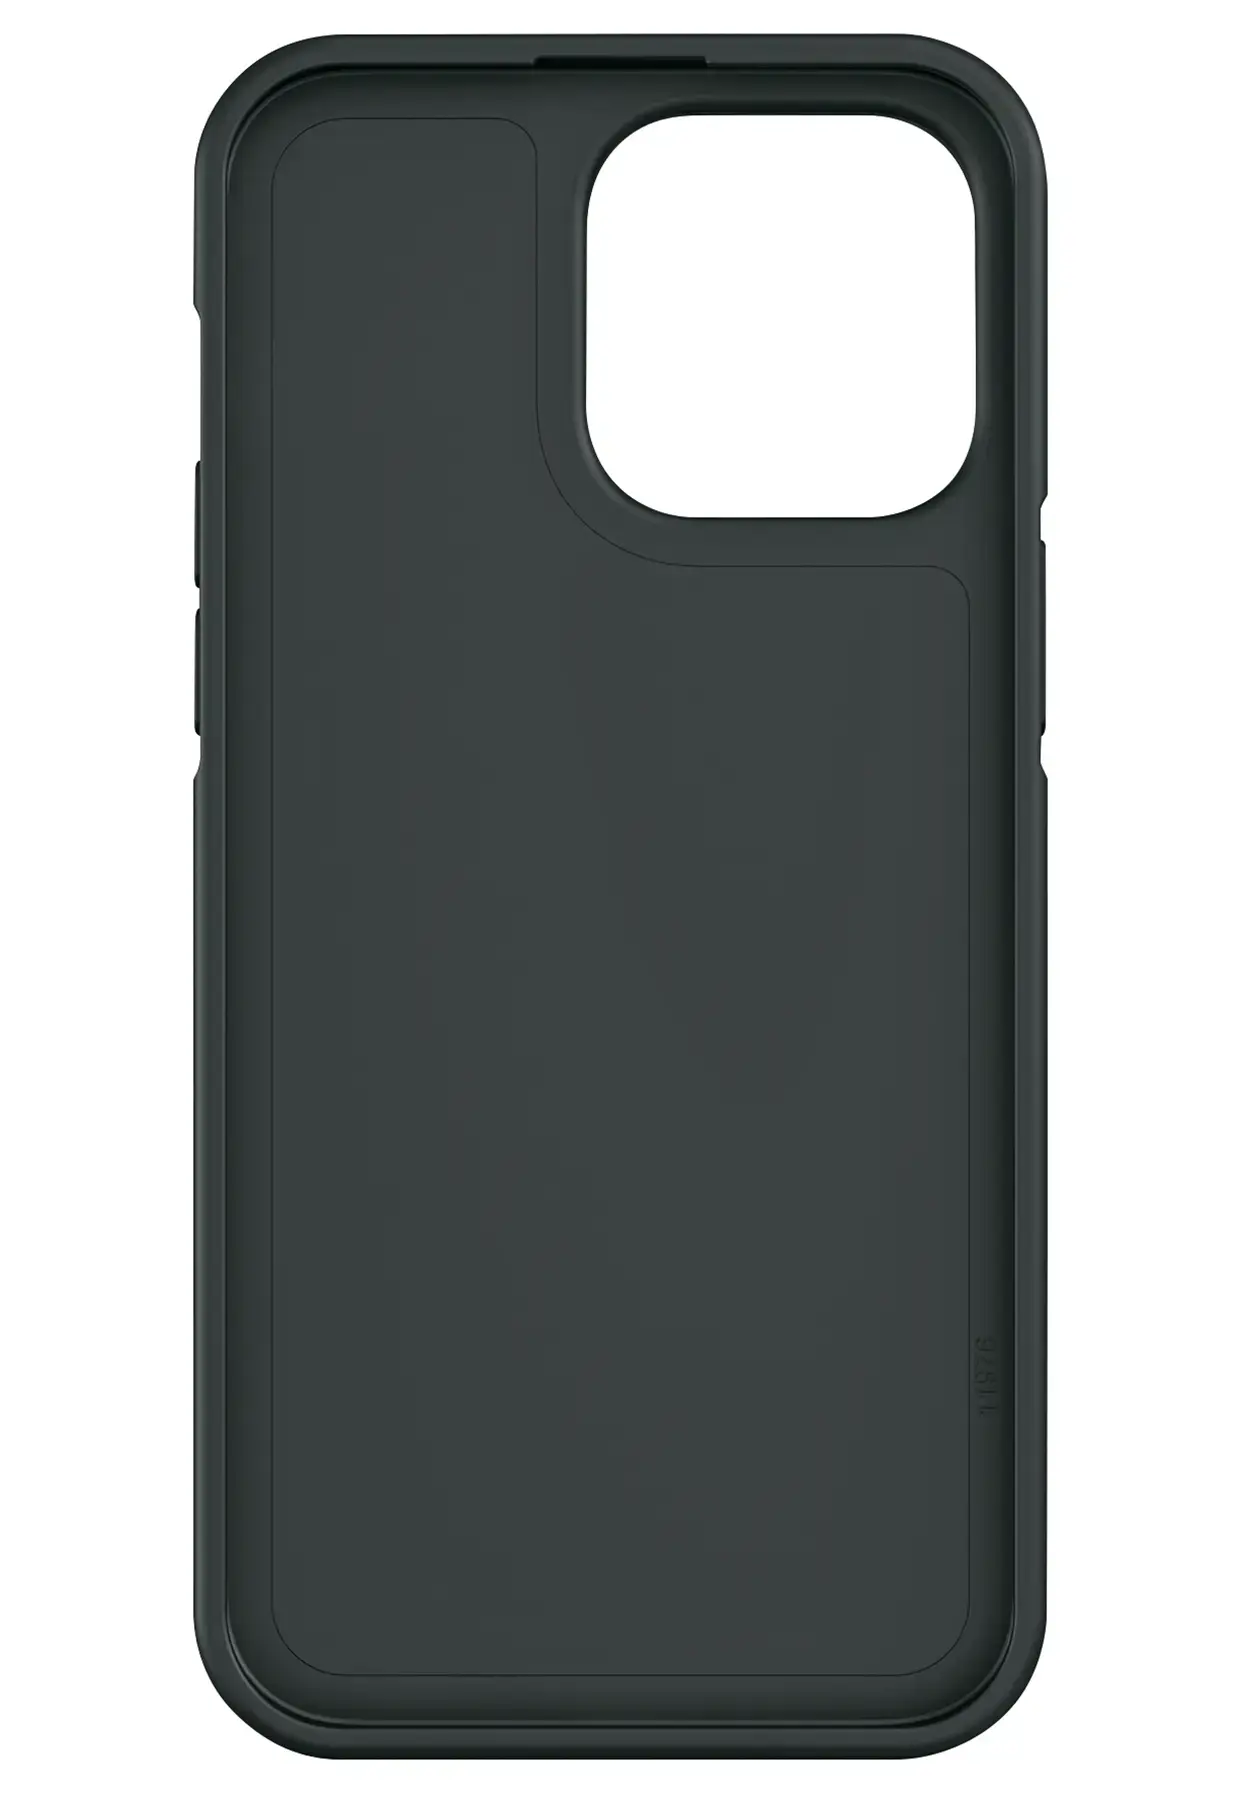 SKS Compit Cover iPhone 14 Pro Max